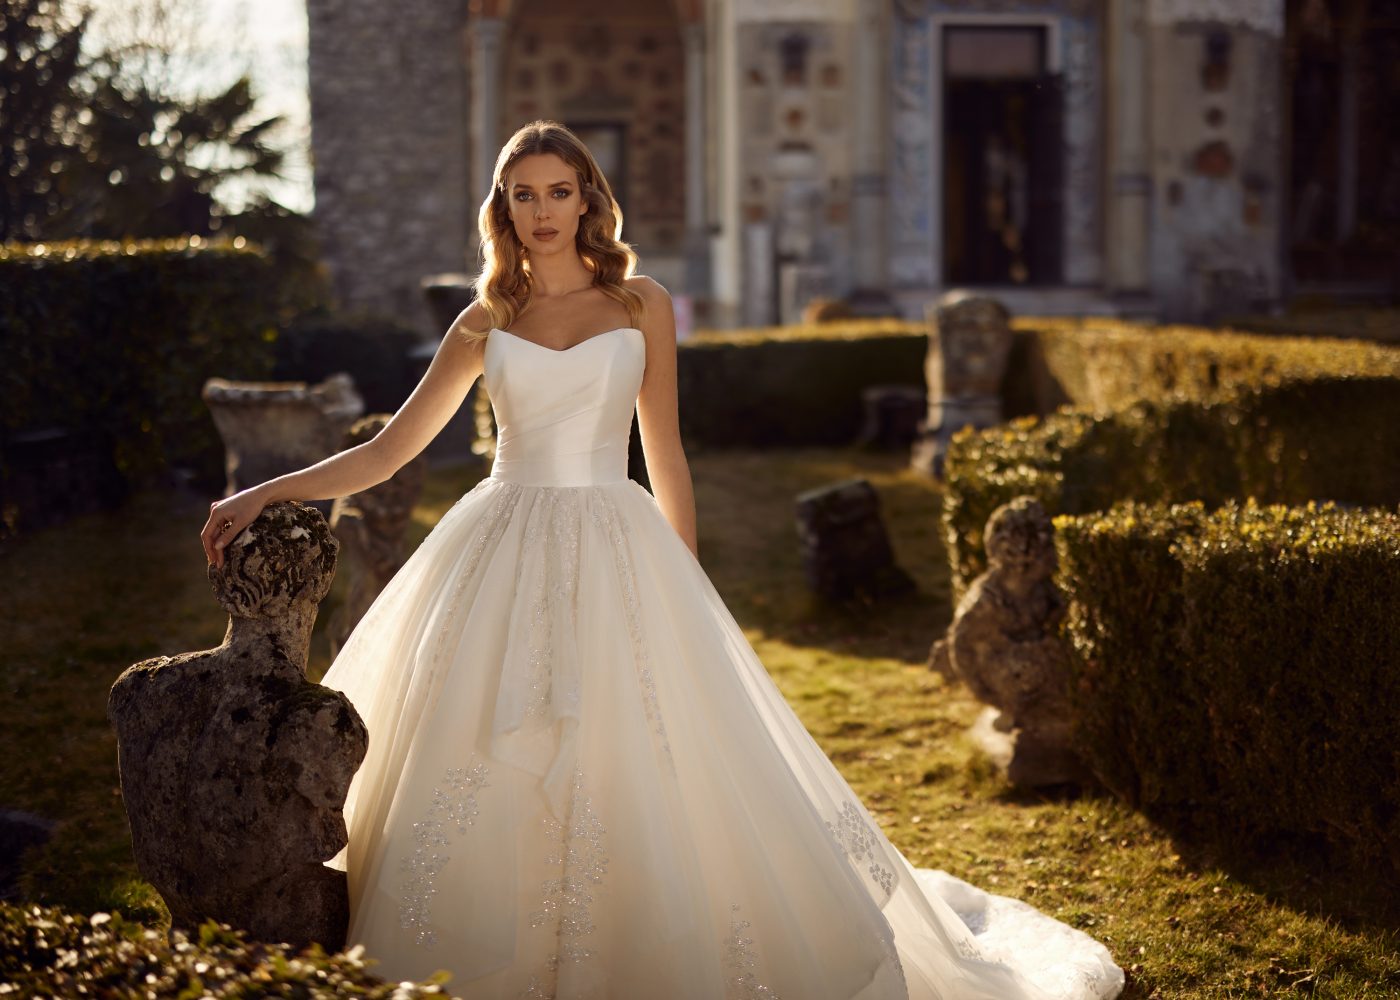 15 Timeless Wedding Gowns | hitched.ie - hitched.ie